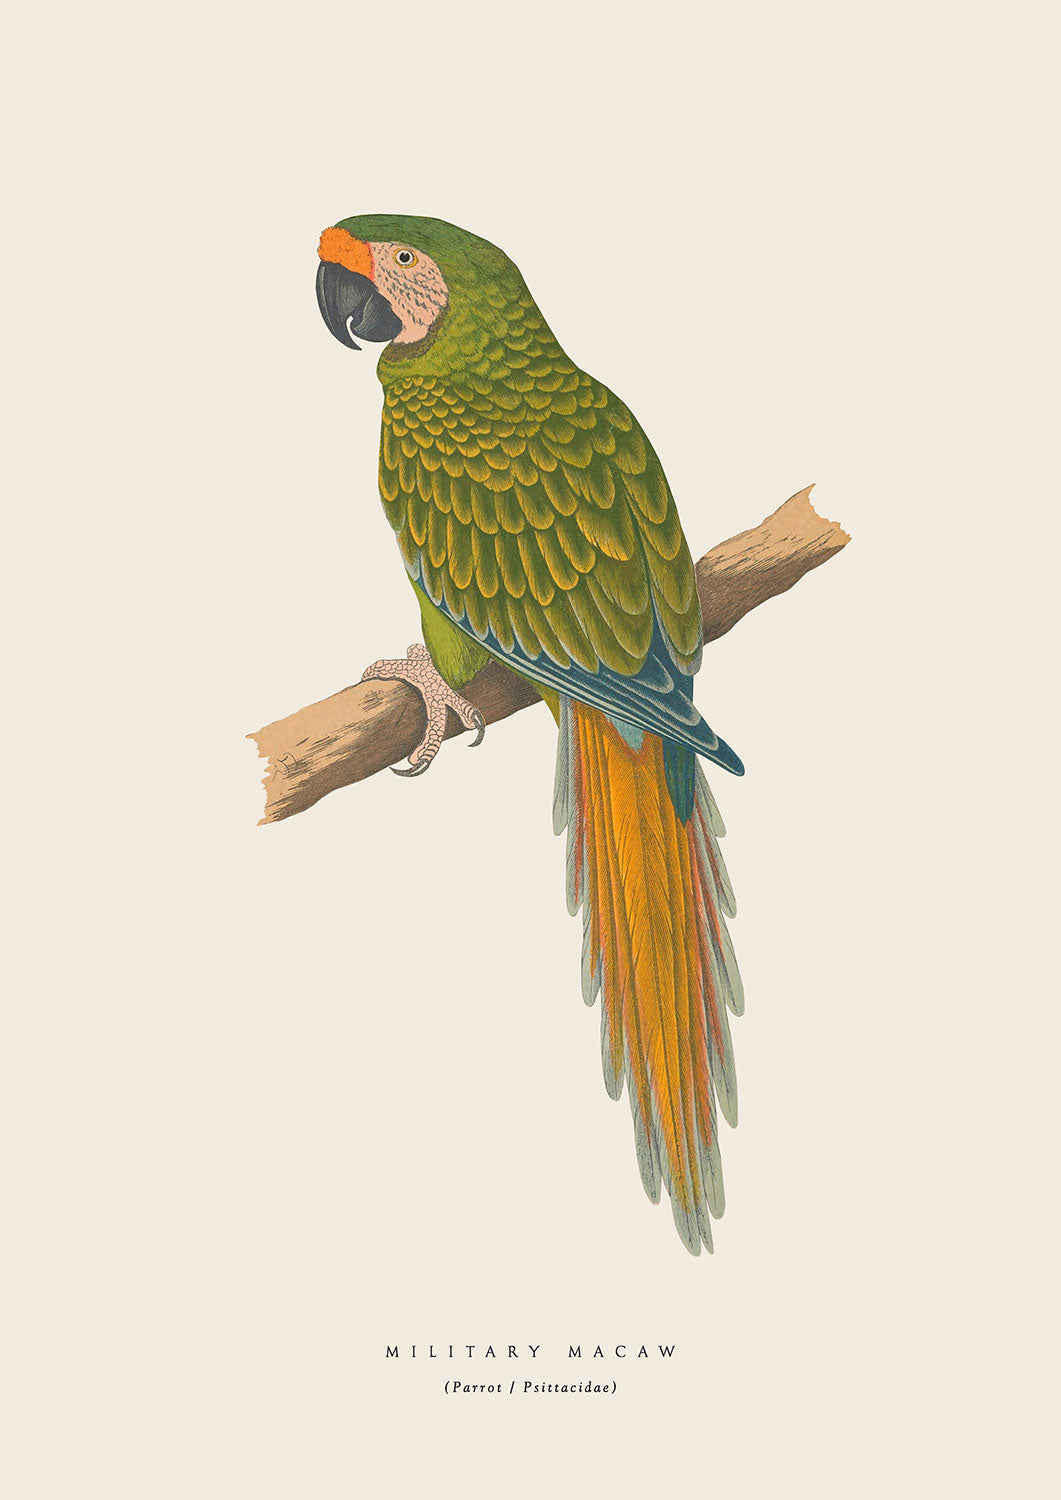 GreenMacaw Parrot